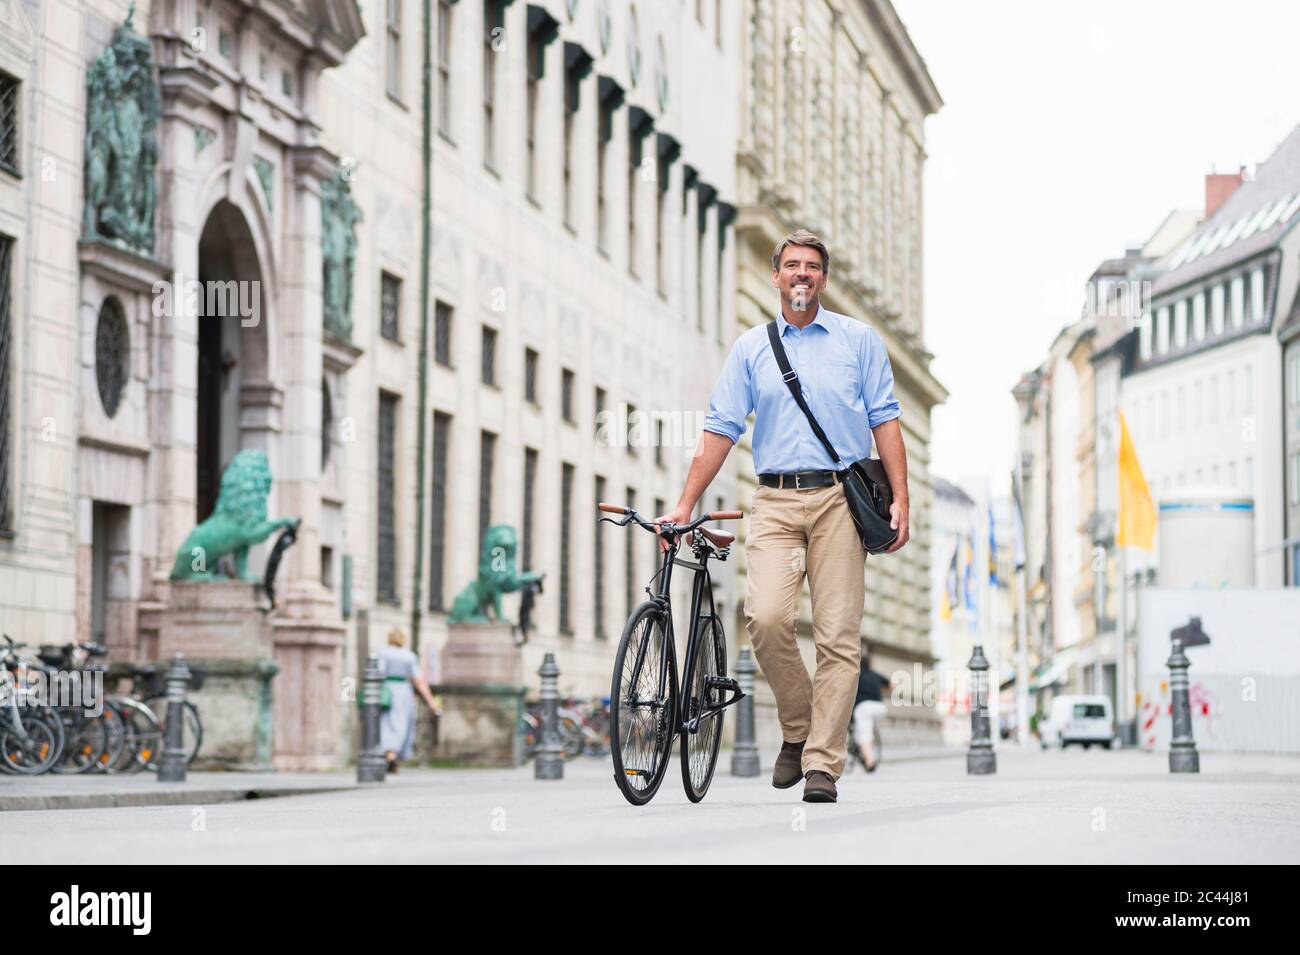 Smiling businessman carrying messenger bag walking with bicycle on street in city Stock Photo